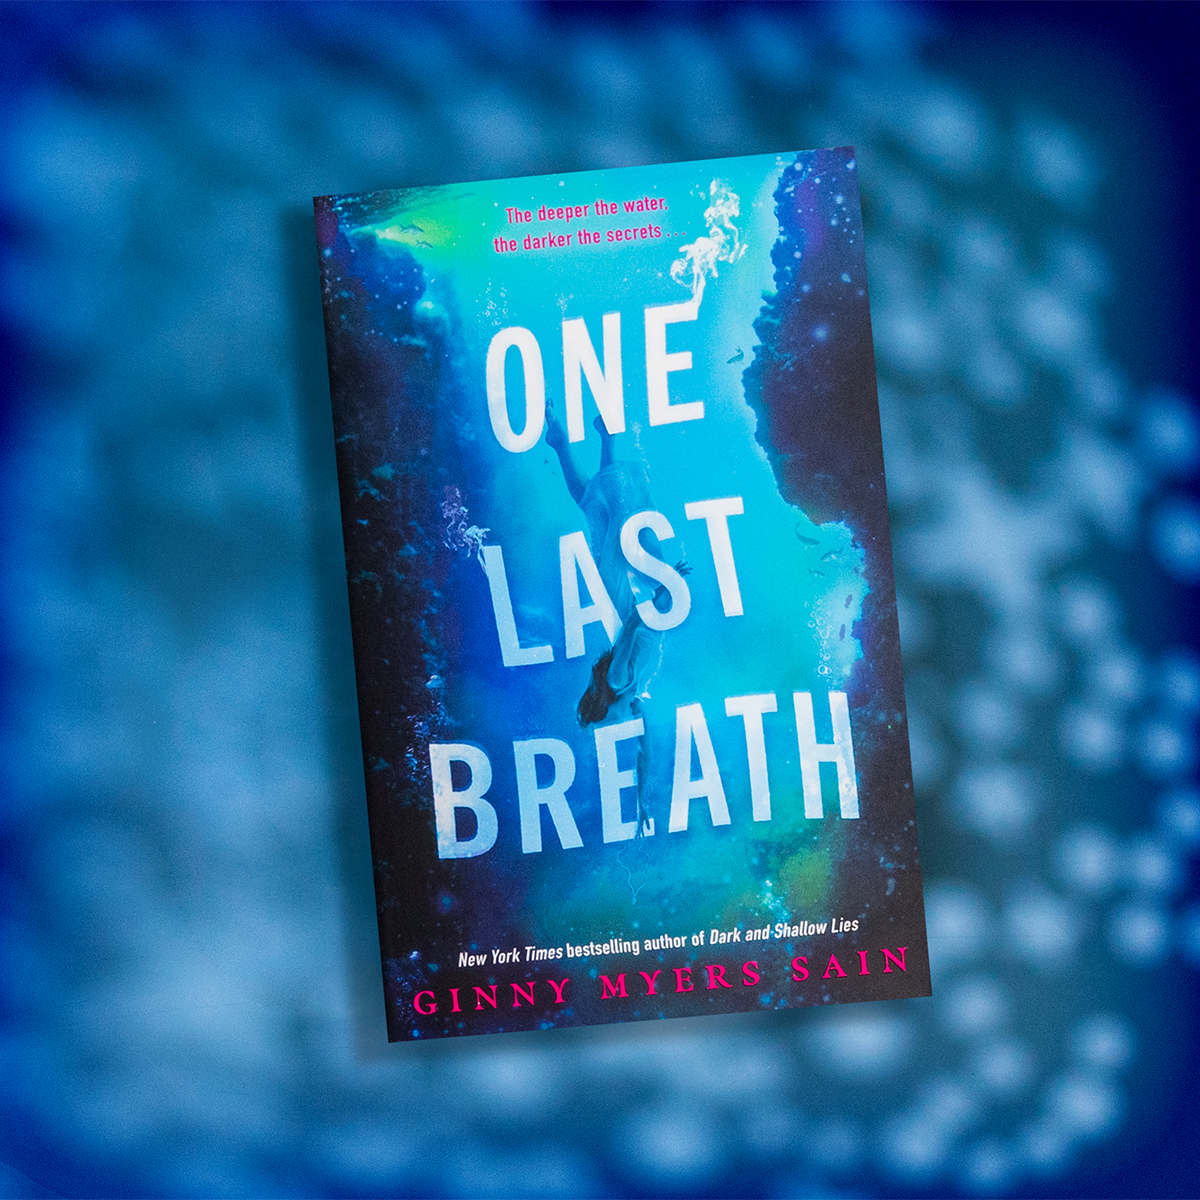 💙 CALLING ALL MURDER MYSTERY GIRLIES 💙 If you like your thrillers with an atmospheric Florida setting and a dash of the supernatural, get your hands on One Last Breath by @stageandpage - OUT TODAY! ow.ly/crew50QT5wl